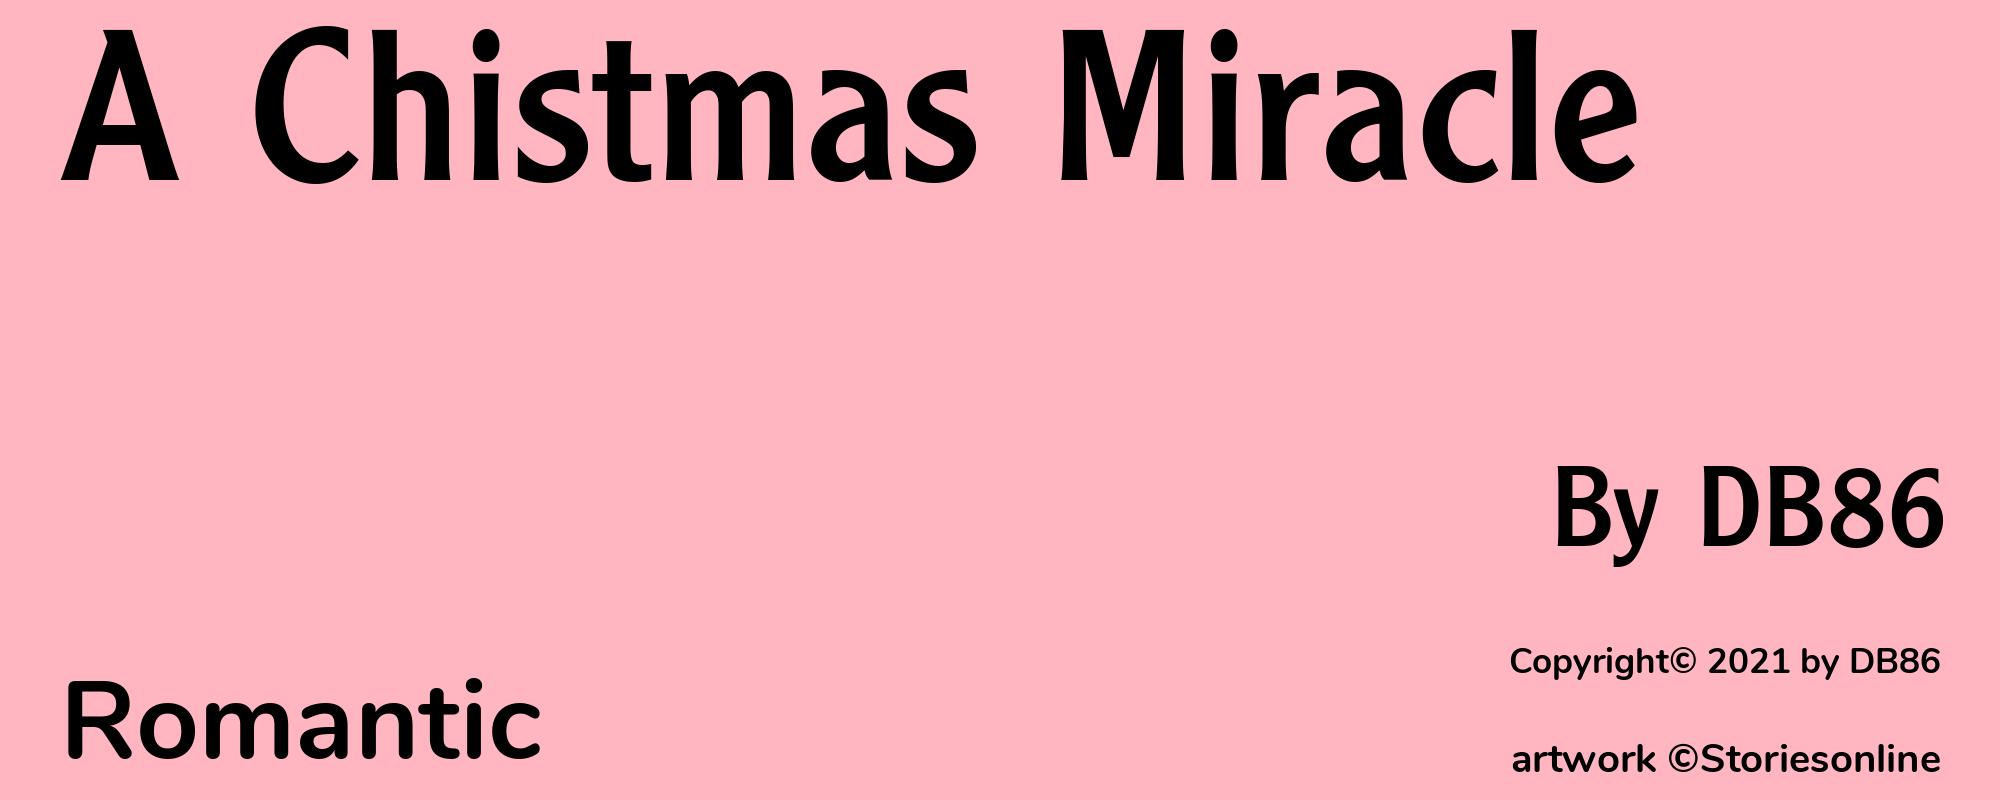 A Chistmas Miracle - Cover